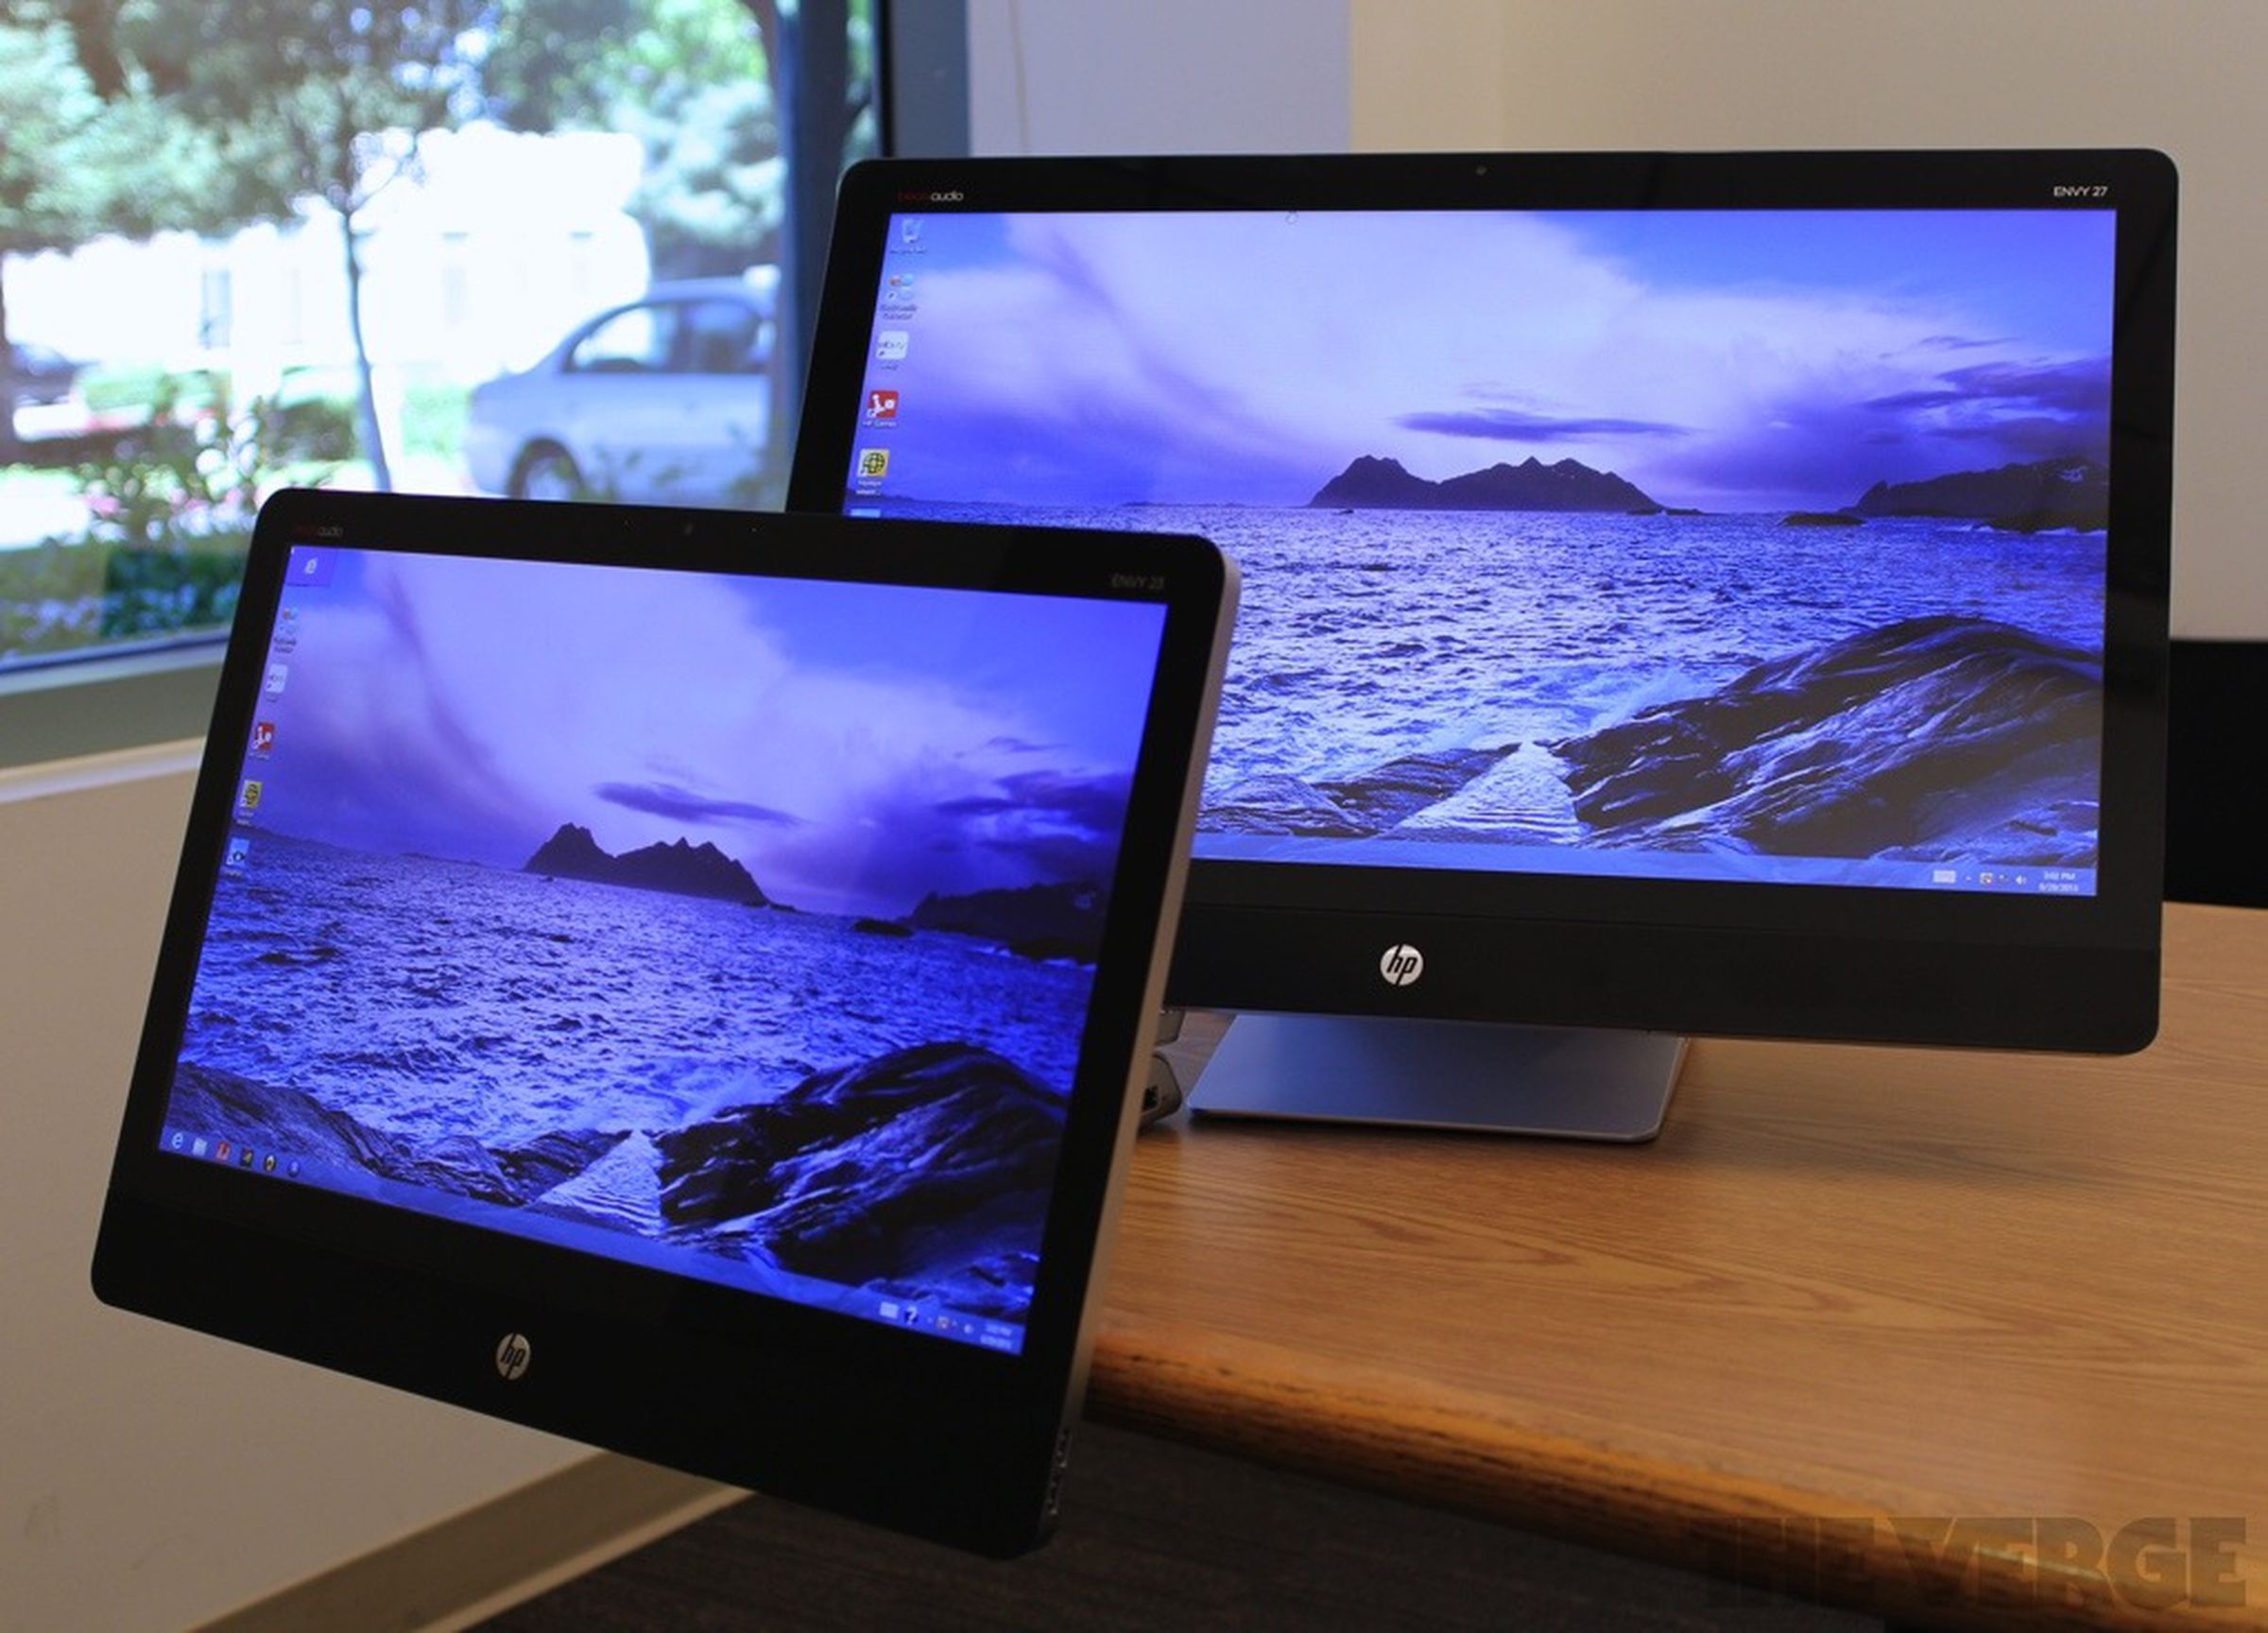 HP Envy 23 Recline and Envy 27 Recline hands-on pictures